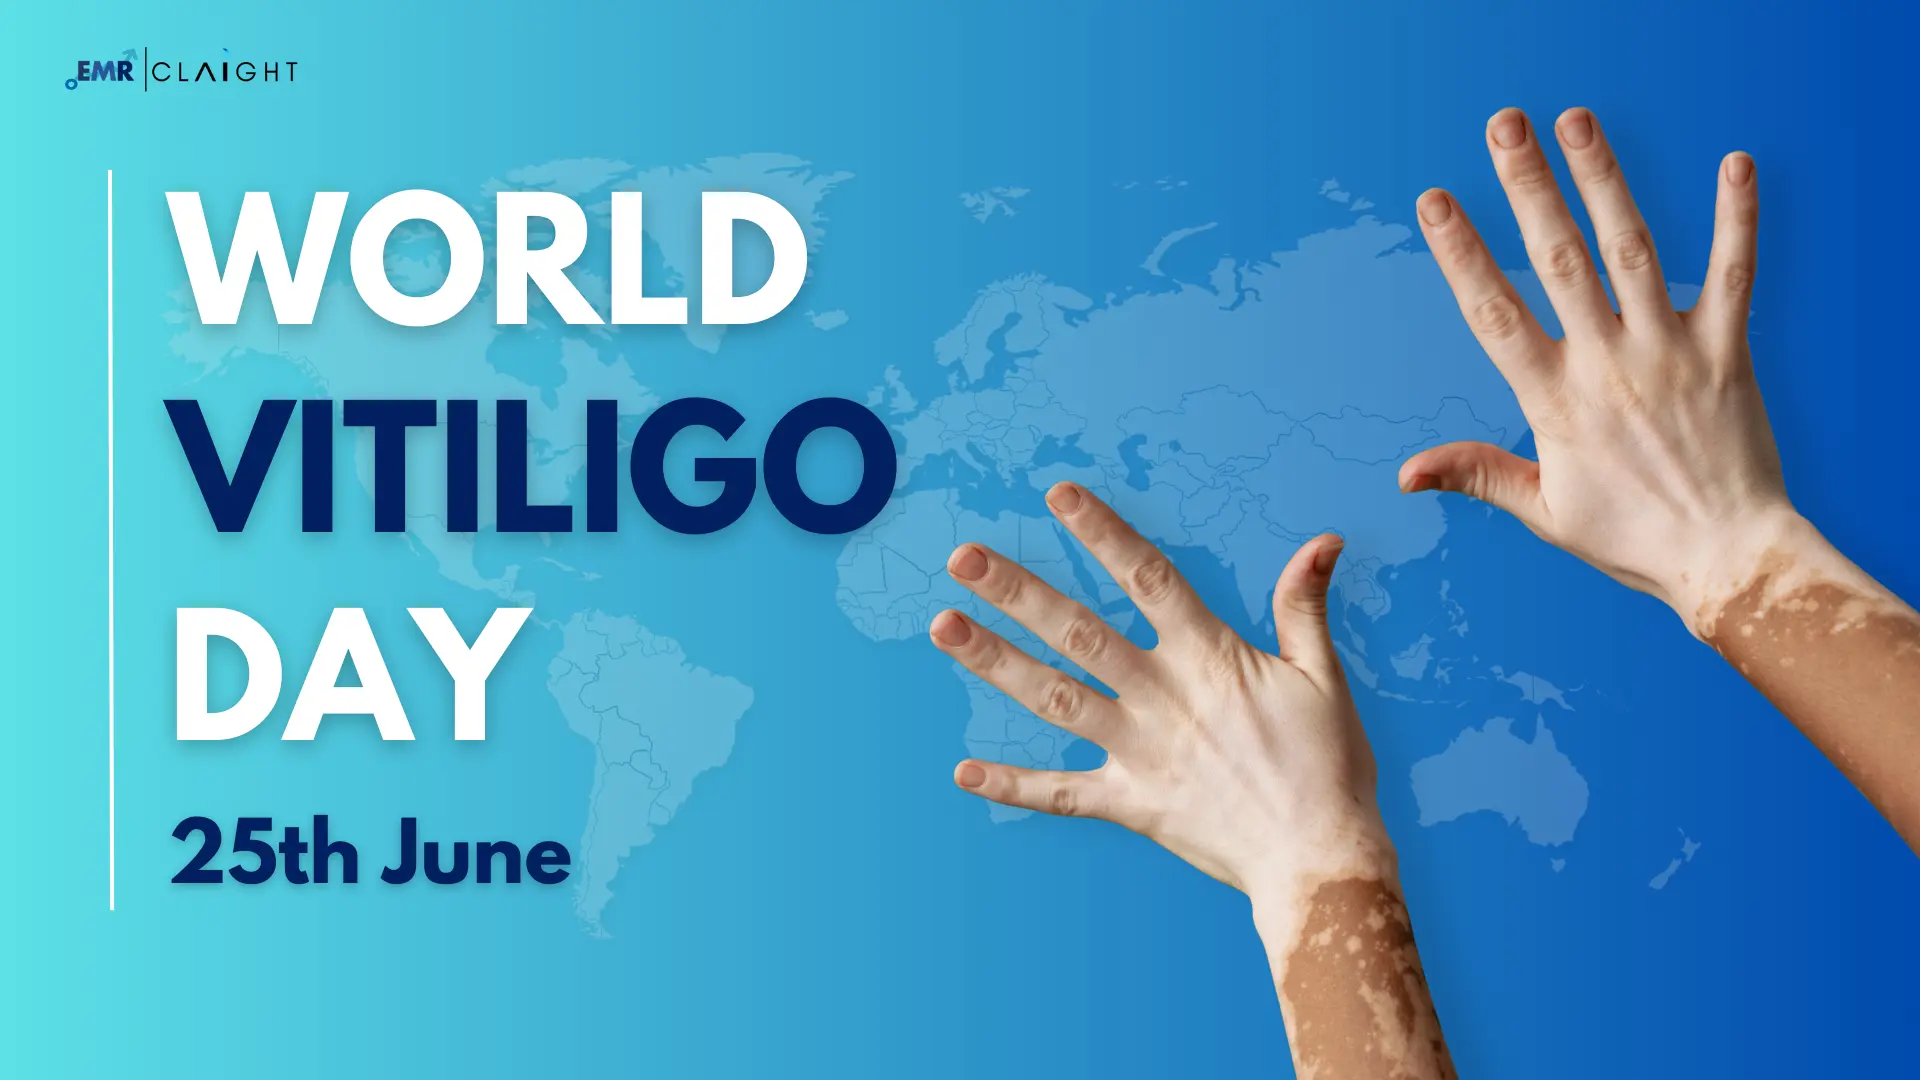 Vitiligo - A Rare Skin Disorder That Affects Nearly 1% of the Global Population